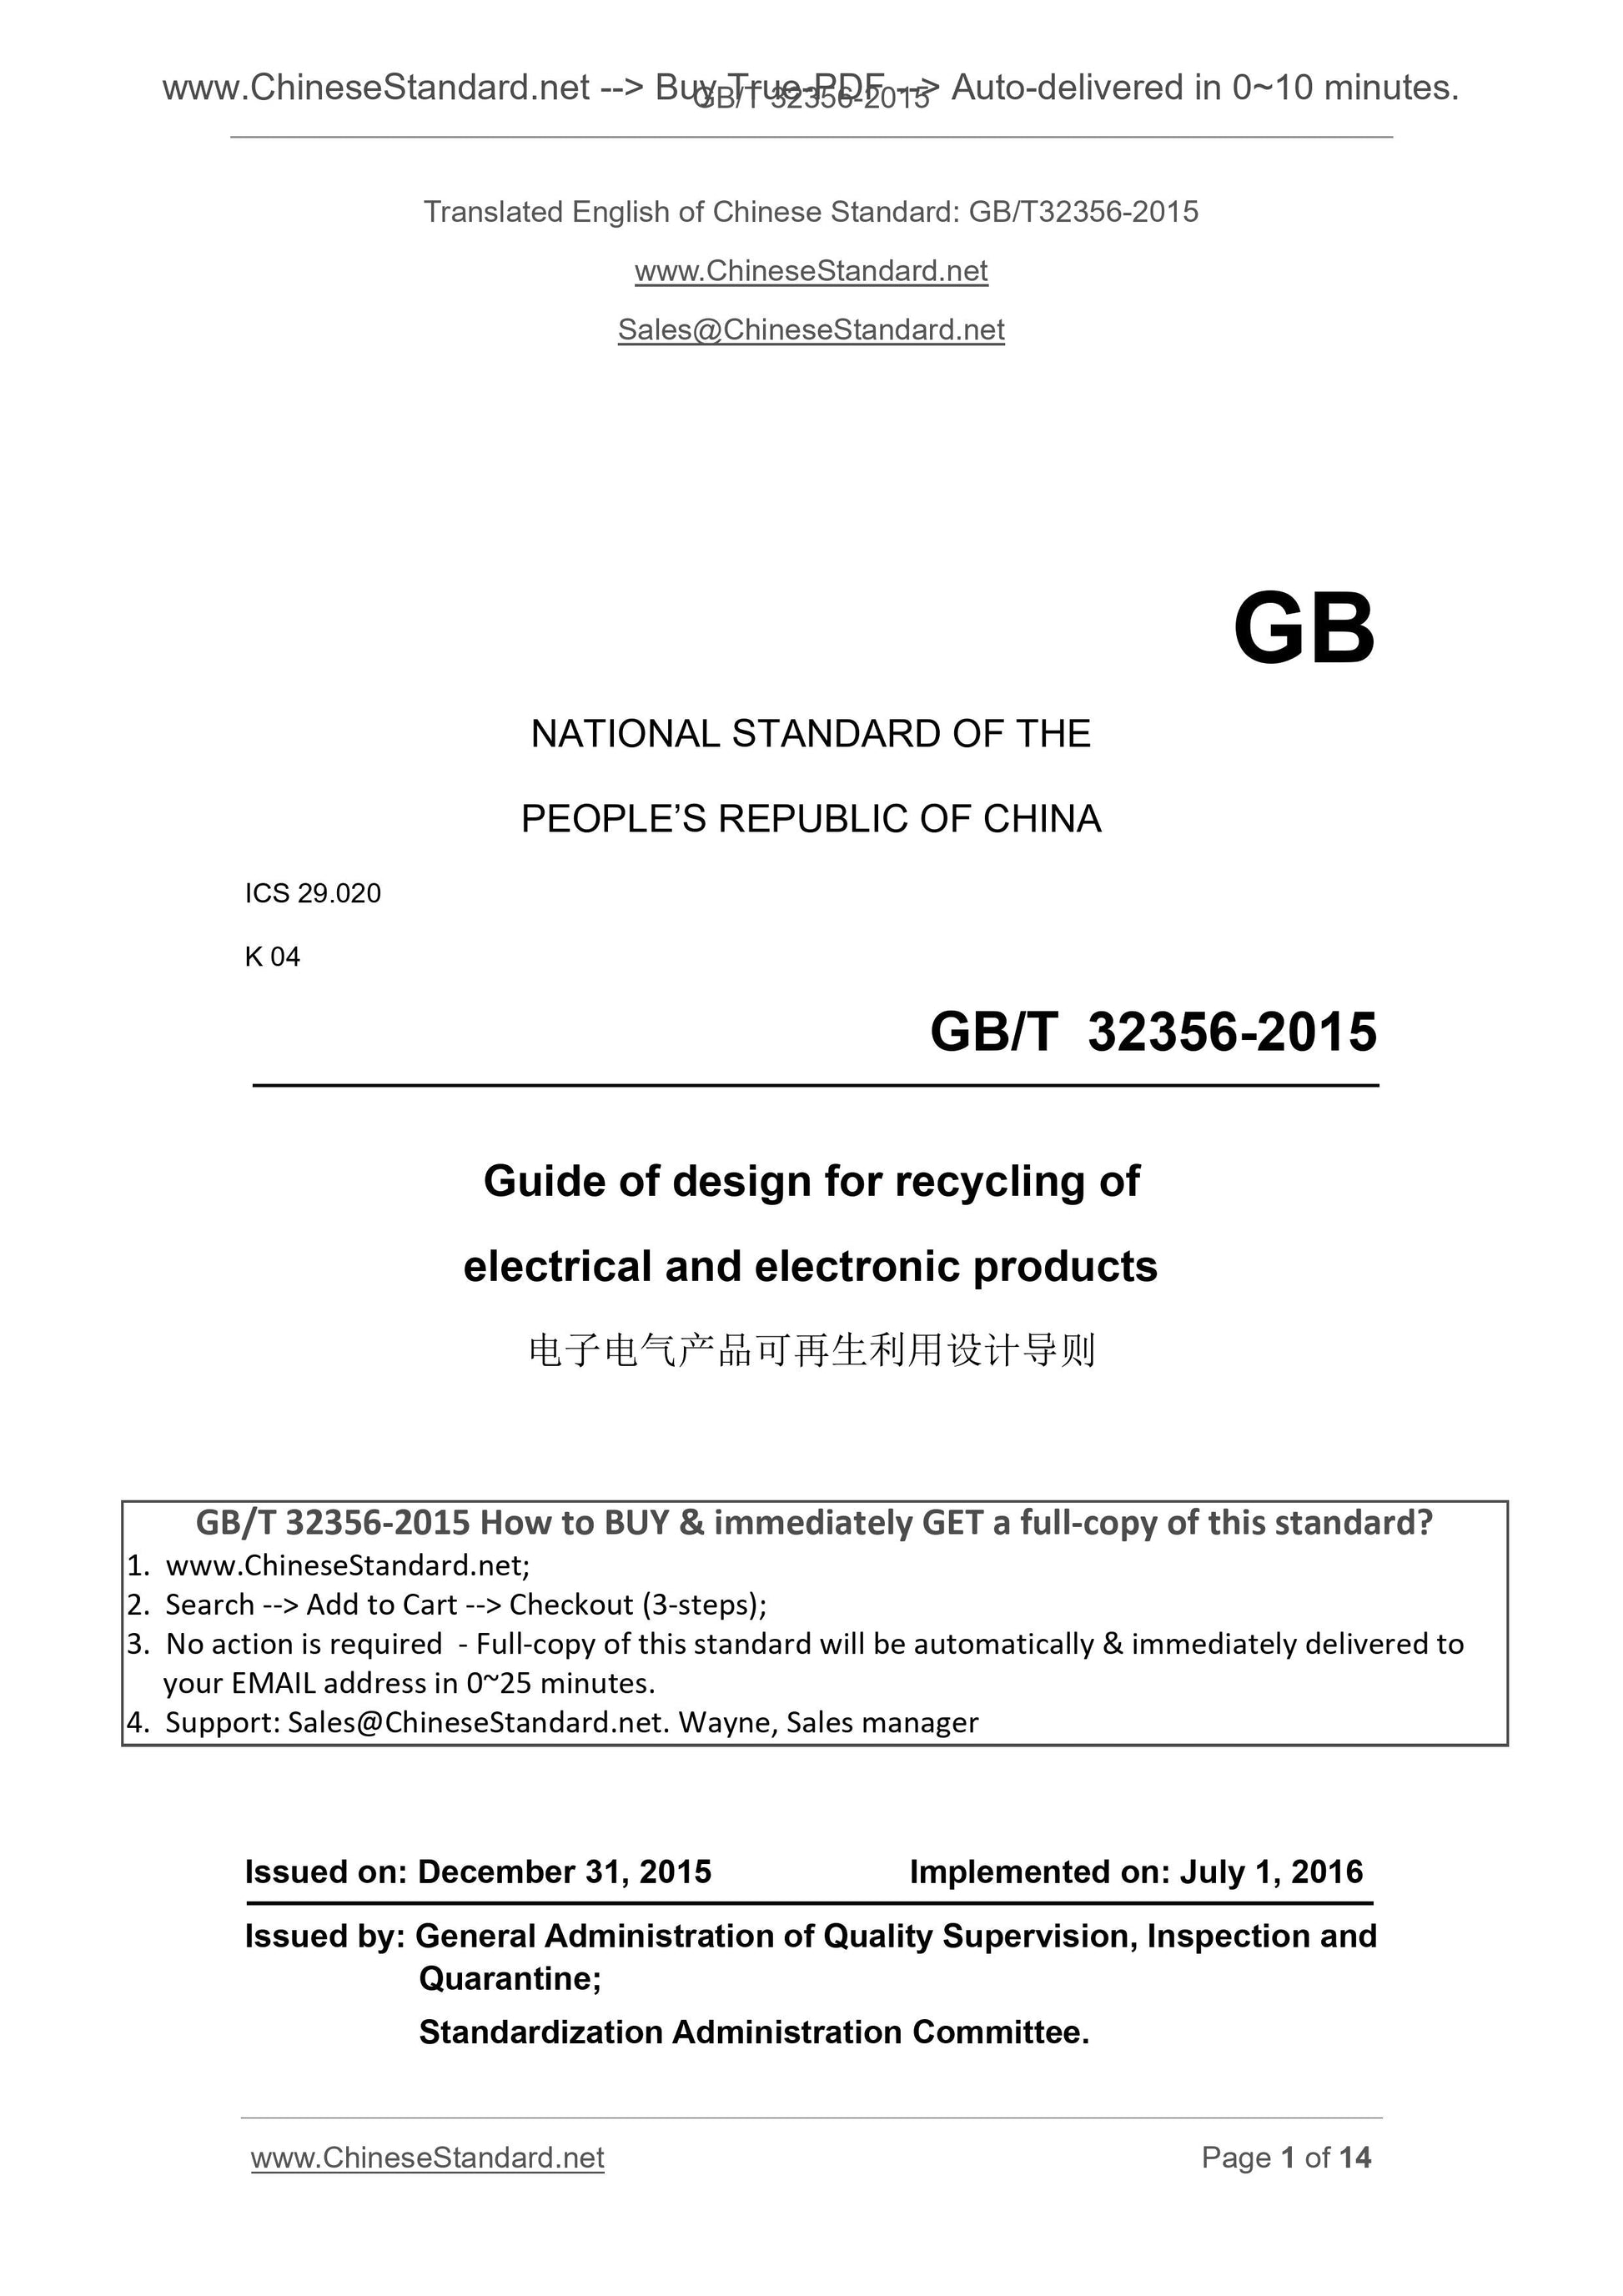 GB/T 32356-2015 Page 1